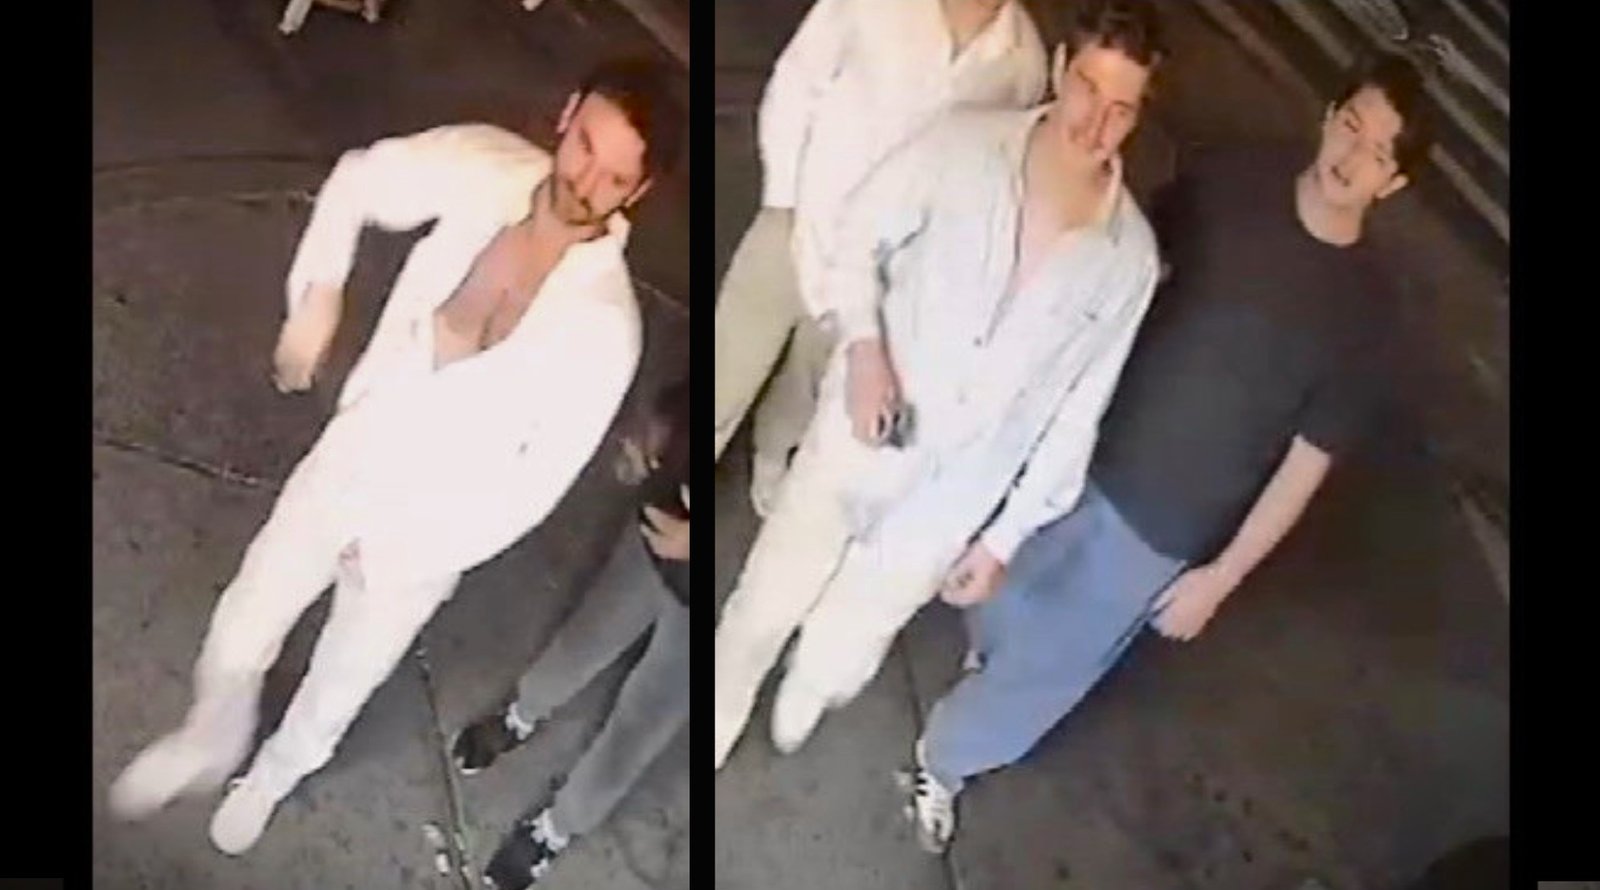 On Monday, the NYPD released images of alleged suspects in the case. The group of men can be seen in the area after the flags had been vandalized around 3 a.m. Saturday.